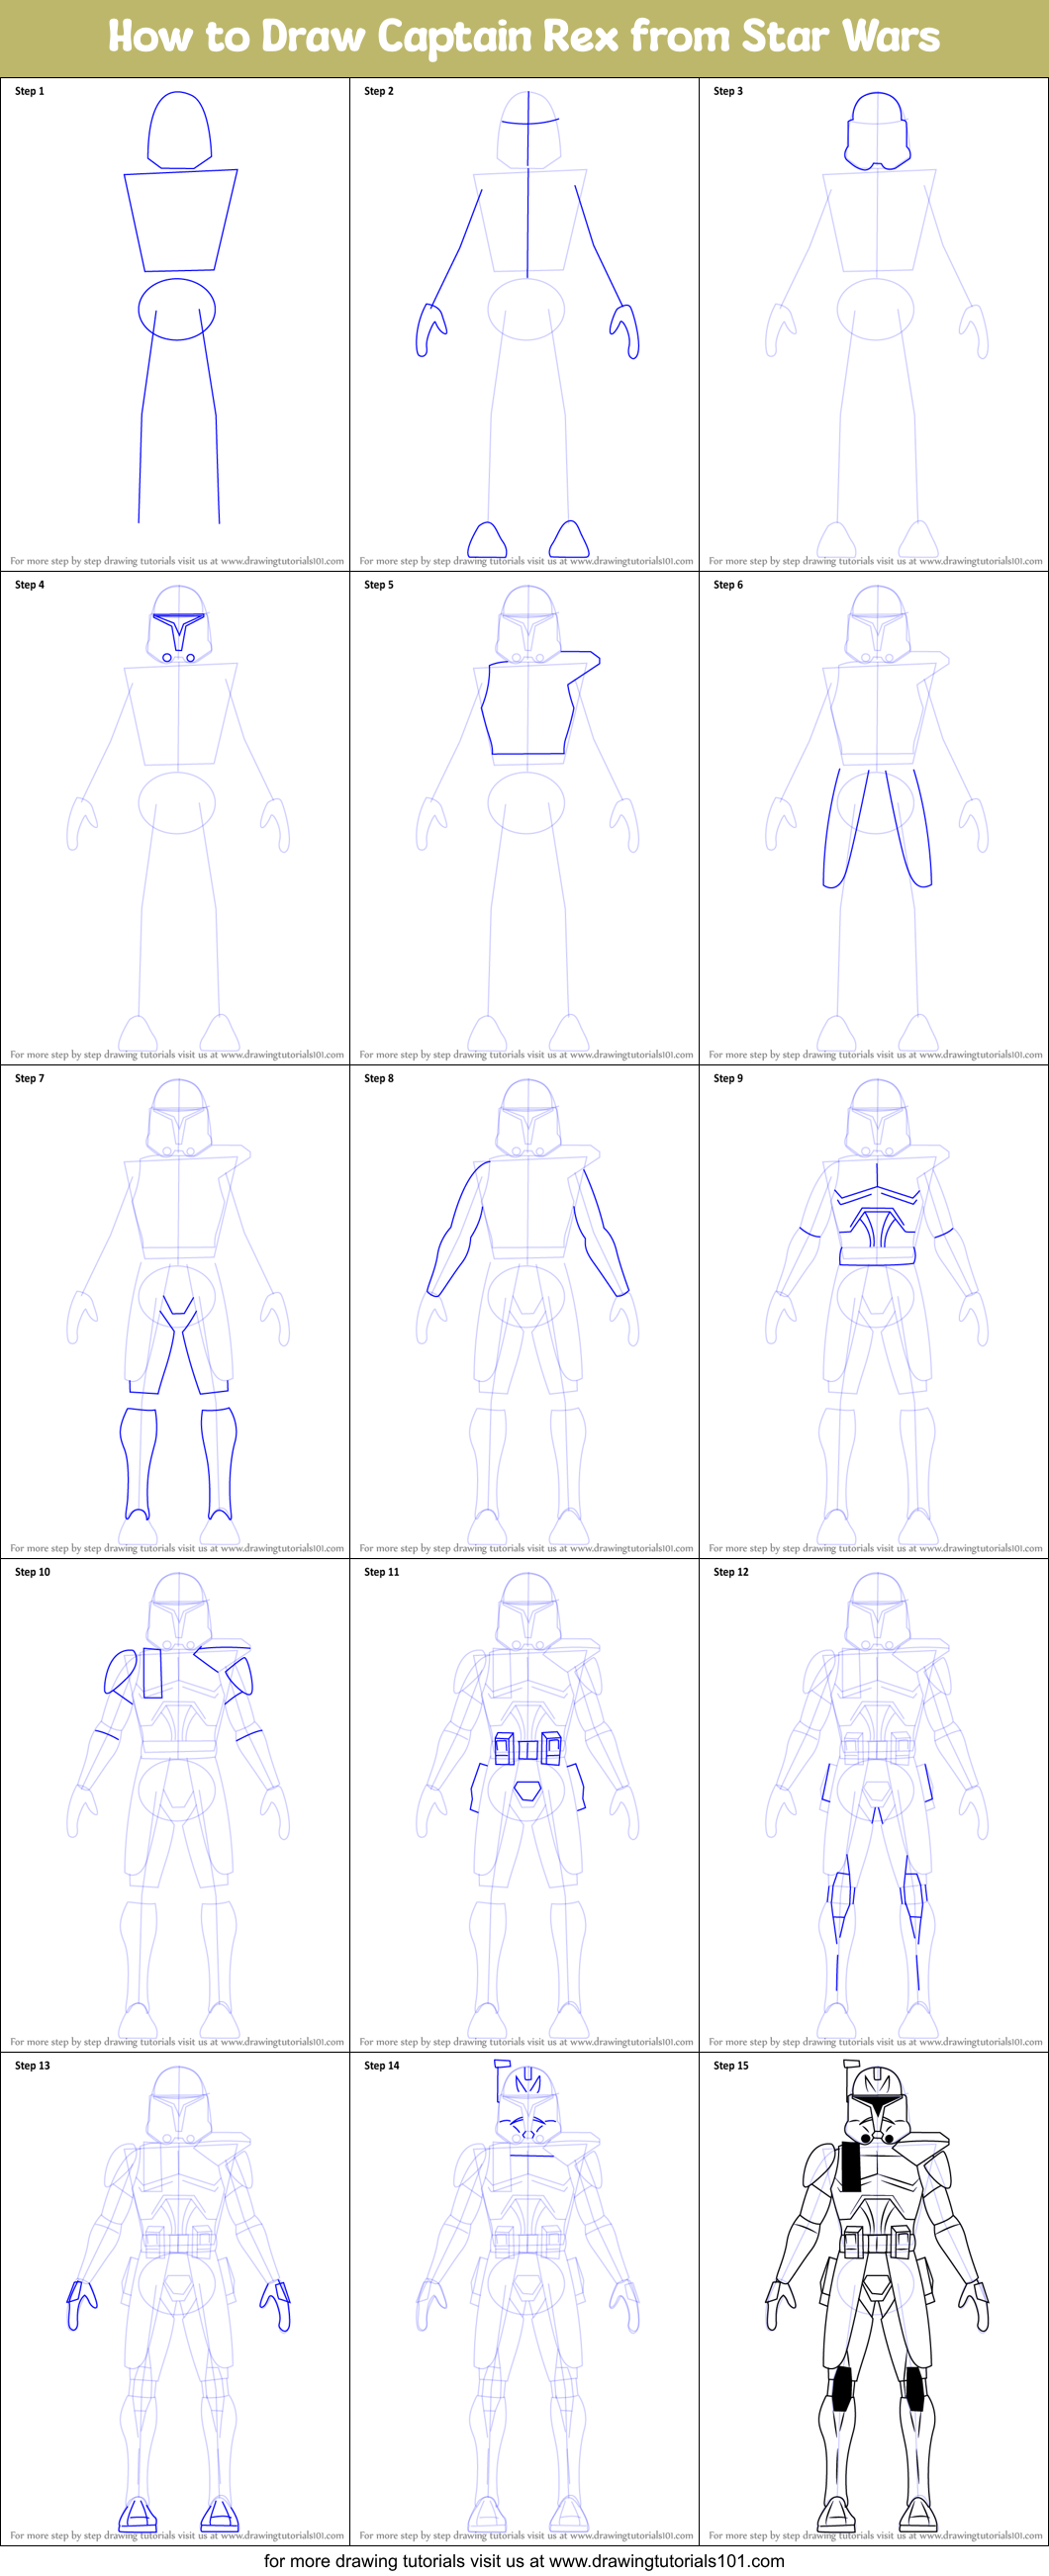 How to Draw Captain Rex from Star Wars printable step by step drawing